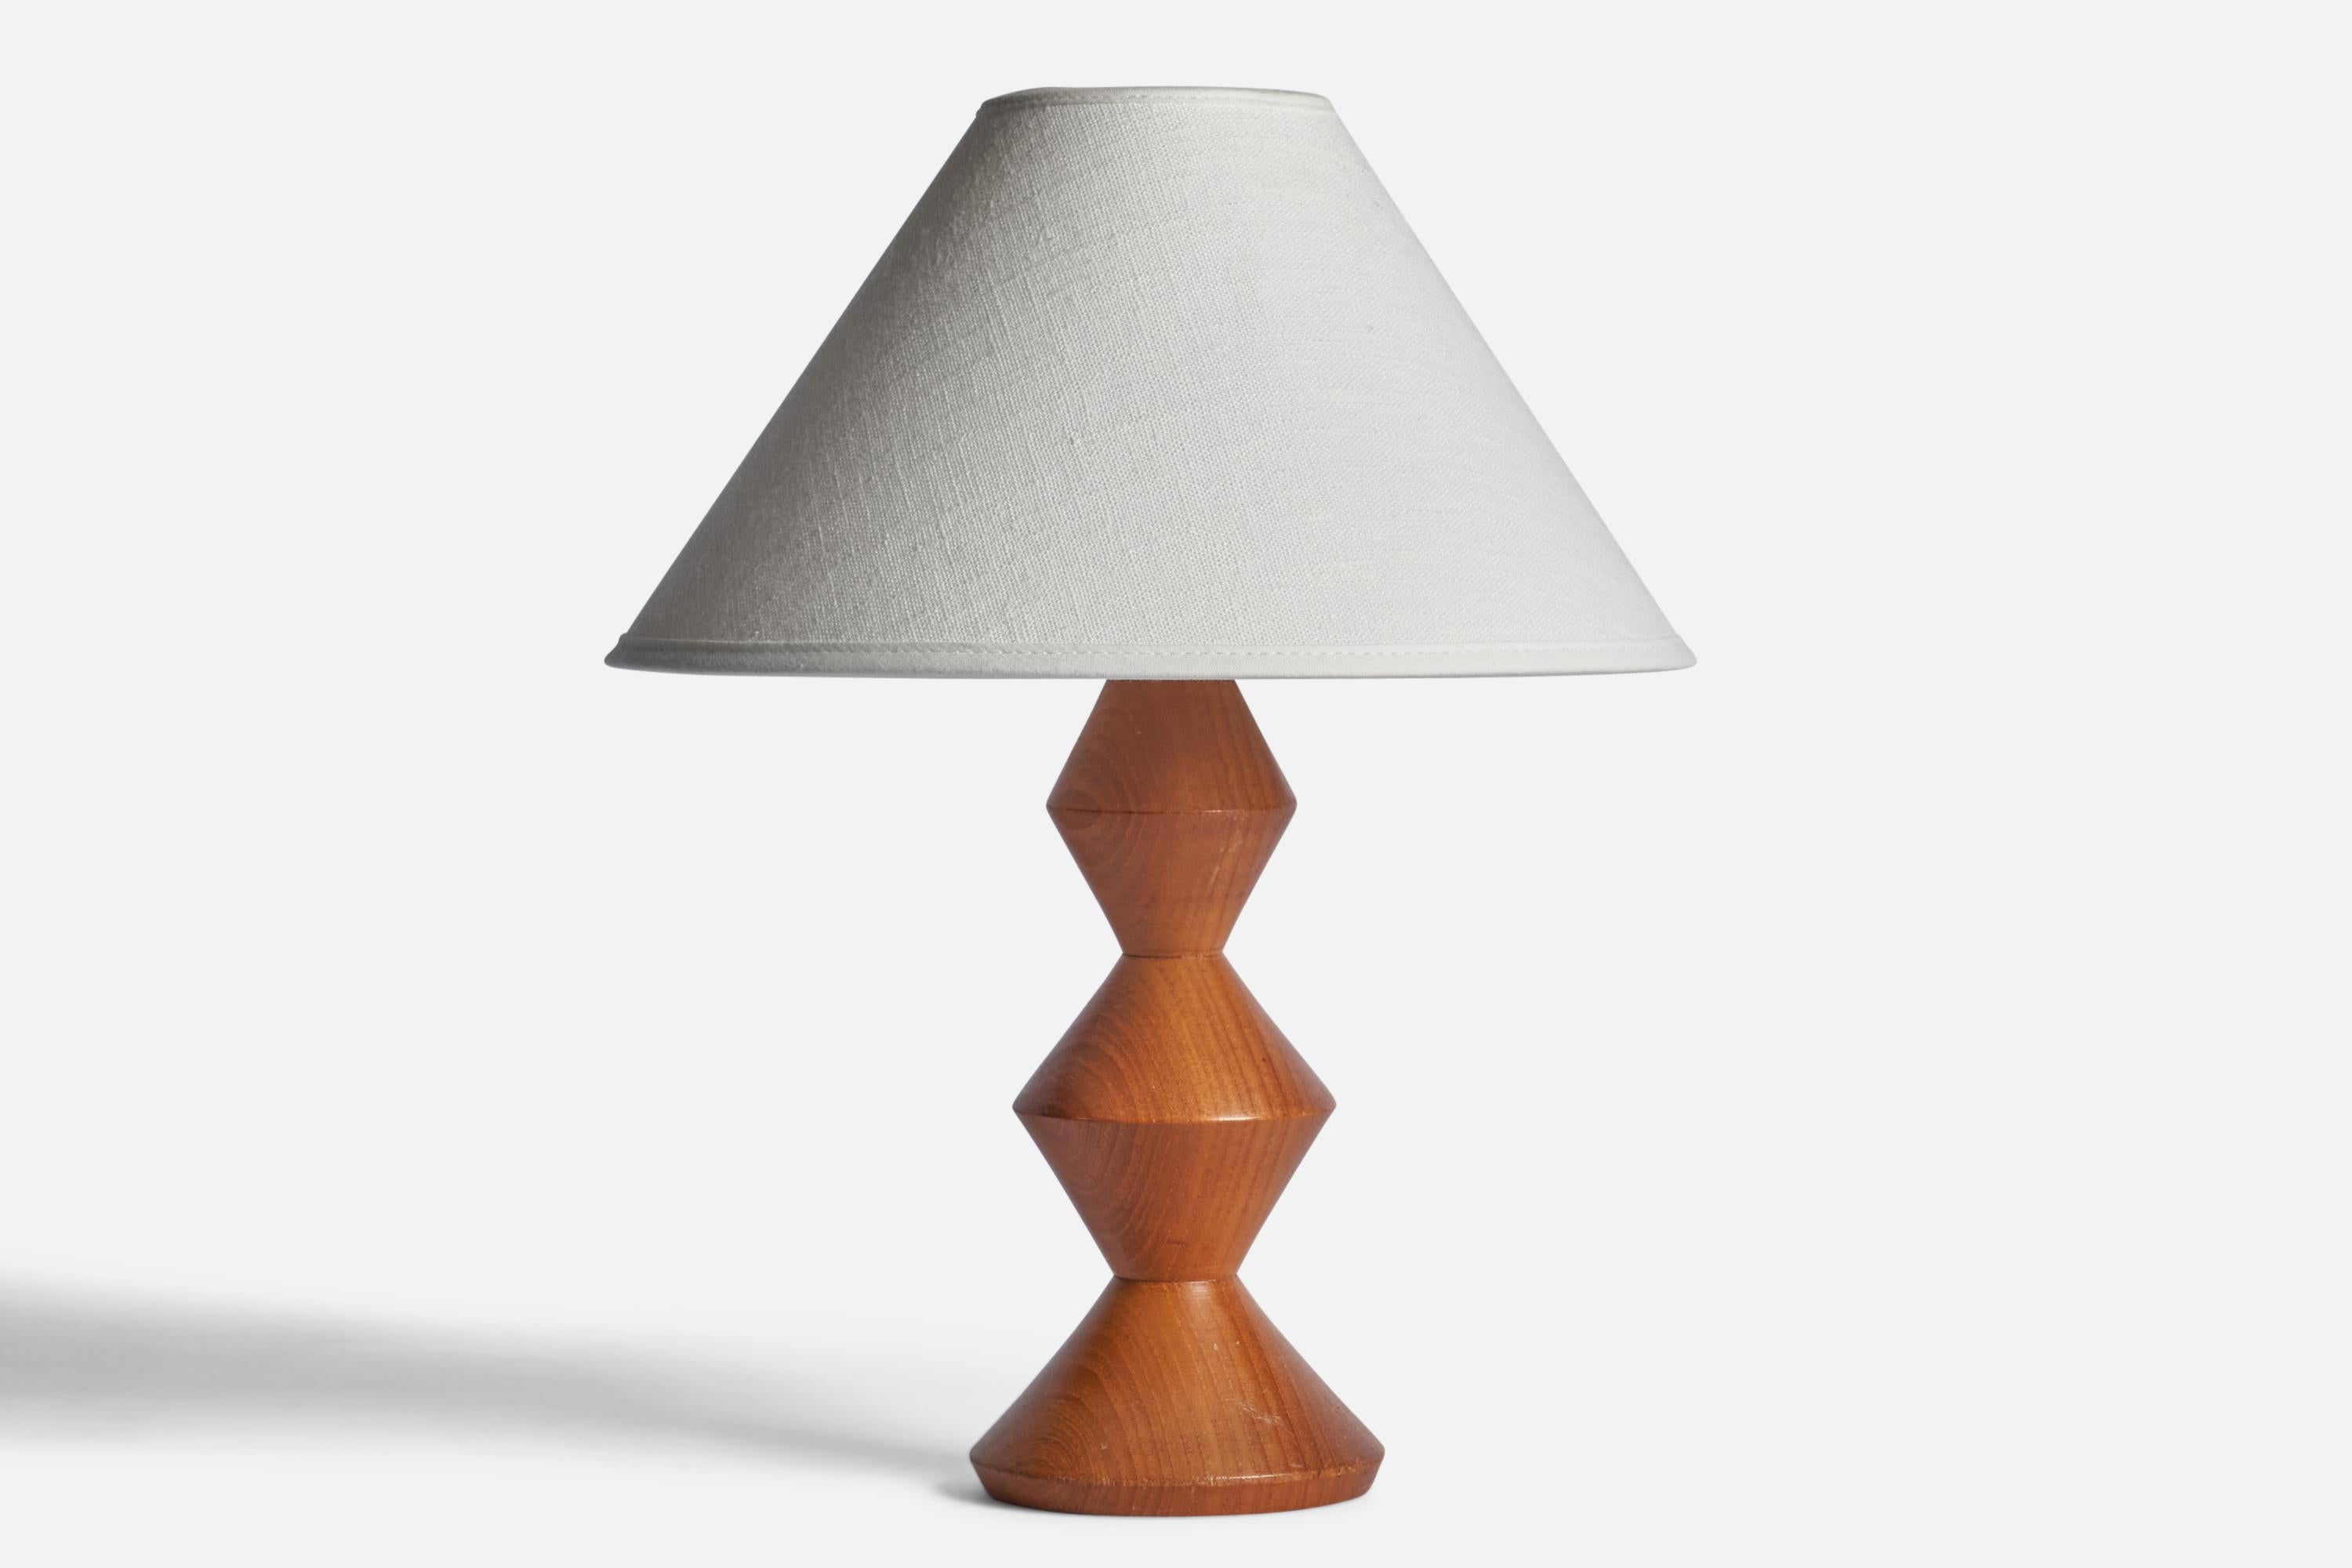 A teak table lamp designed and produced in Sweden, 1960s.

Dimensions of Lamp (inches): 10” H x 4” Diameter
Dimensions of Shade (inches): 2.5” Top Diameter x 10” Bottom Diameter x 5.5